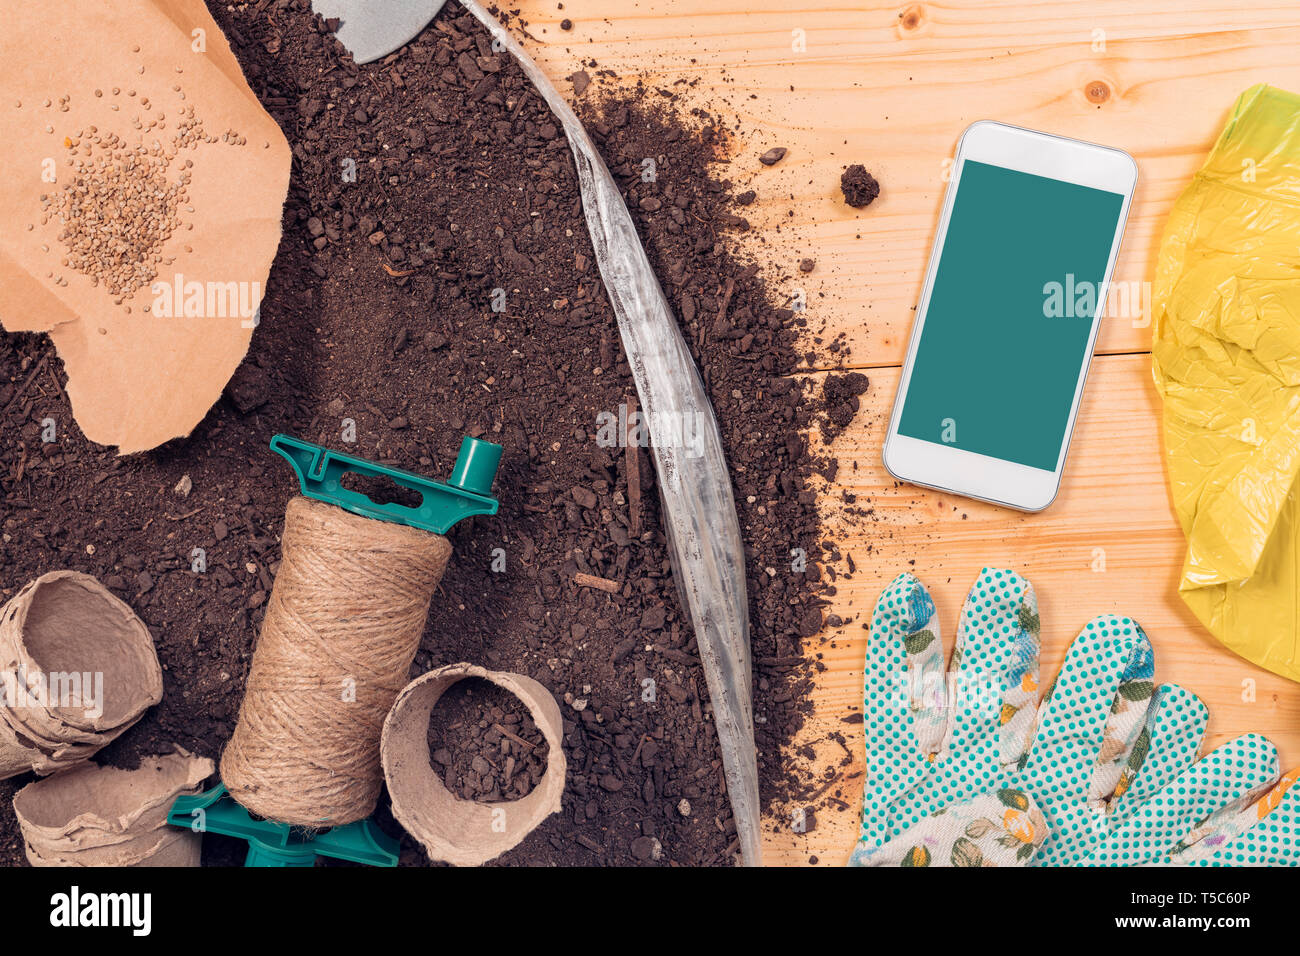 Smartphone screen mock up for gardening and seeding app with tools and equipment on potting soil Stock Photo